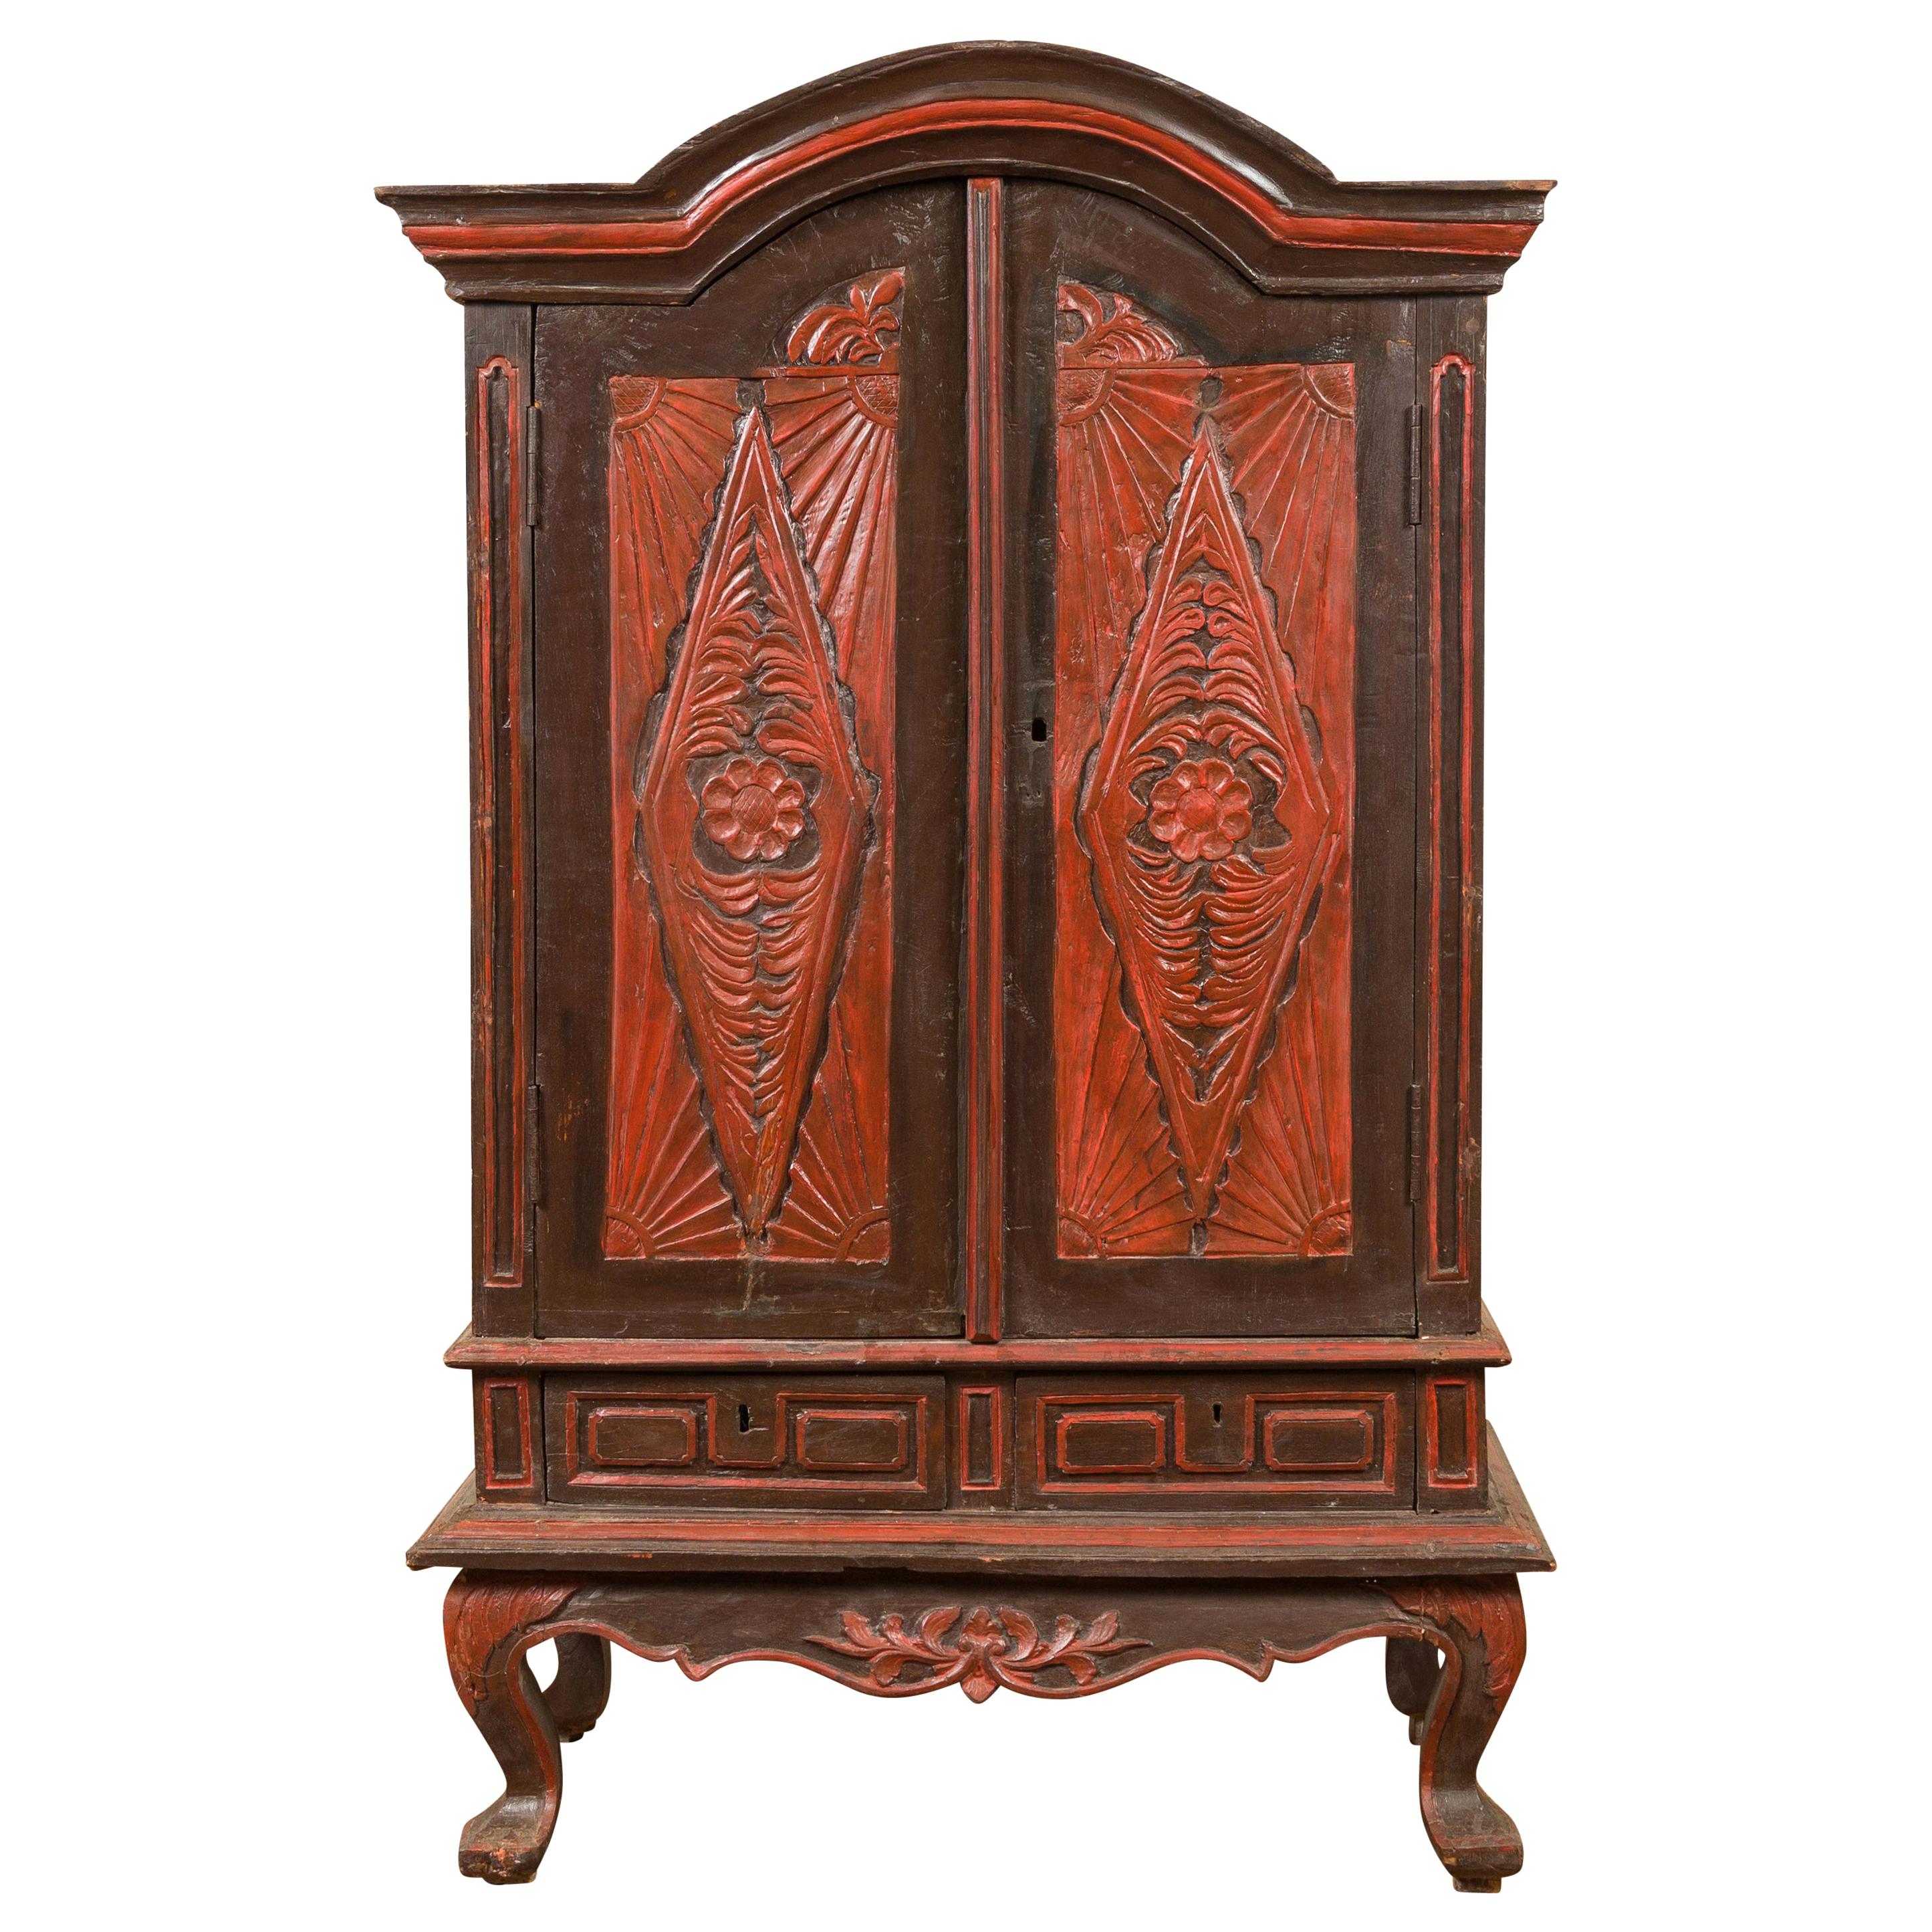 Dutch Colonial Late 19th Century Bonnet Top Cabinet with Carved Doors and Apron For Sale